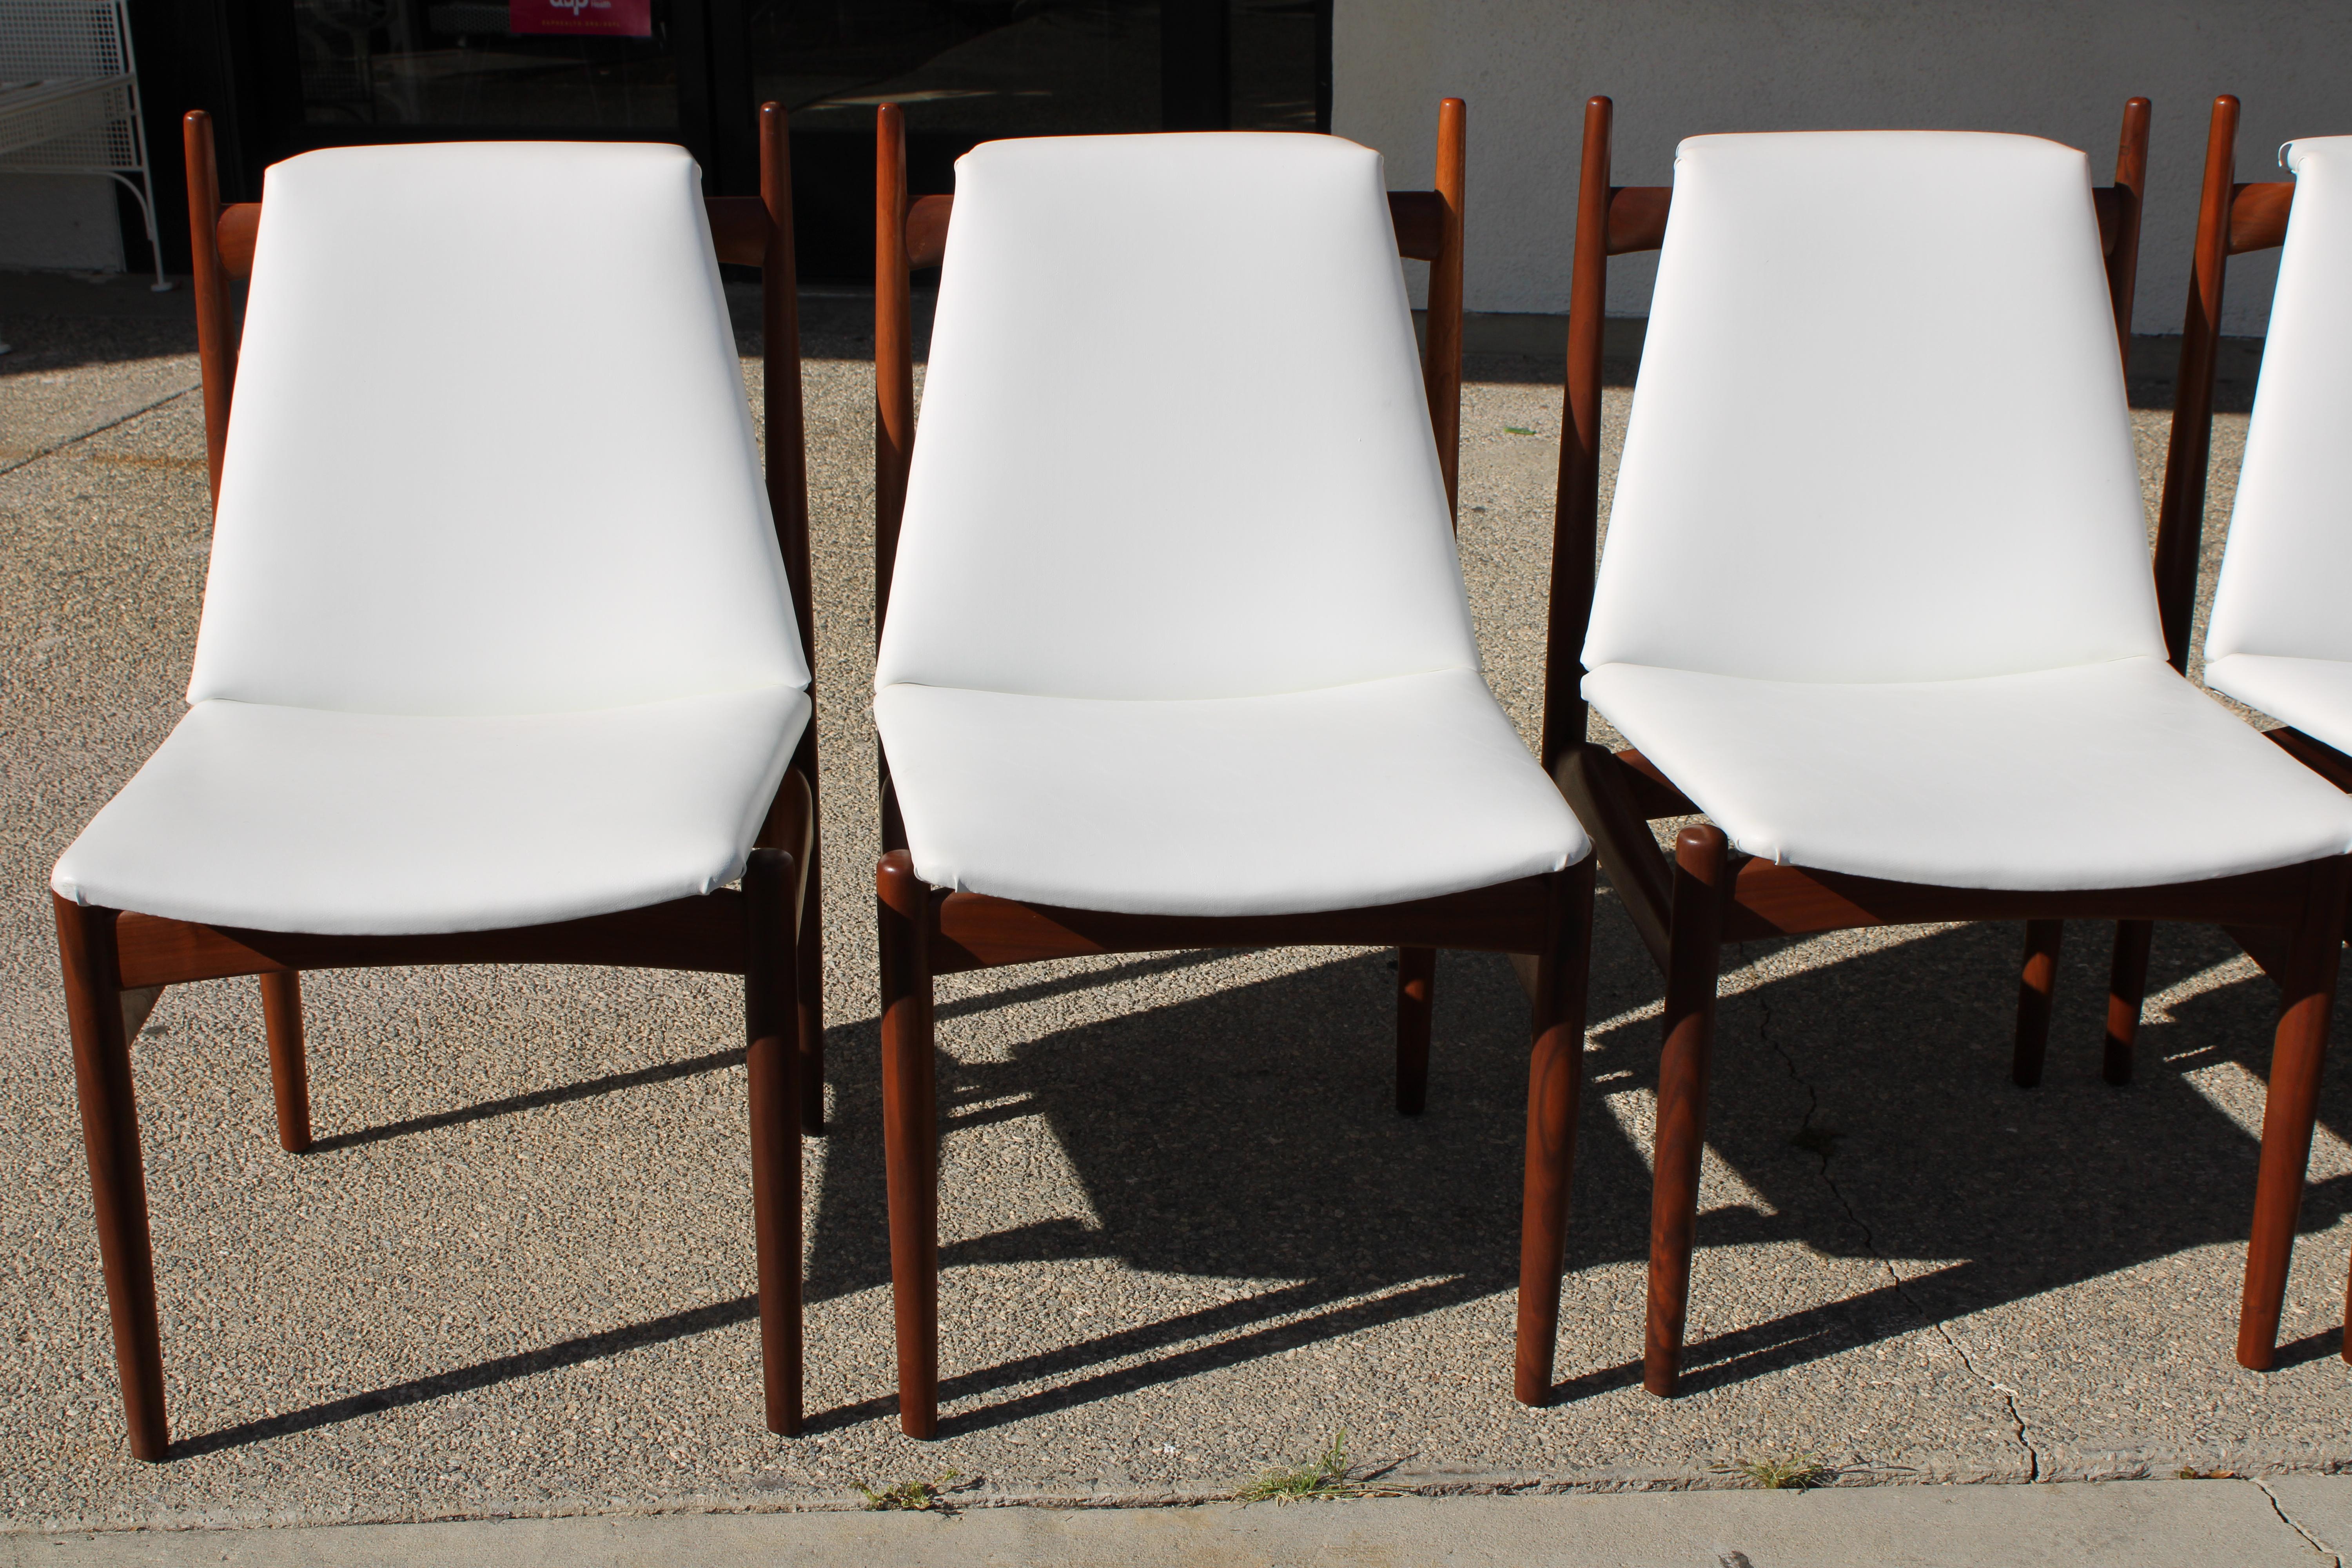 Mid-Century Modern Four Dining Chairs Attributed to Greta Grossman for Glenn of California